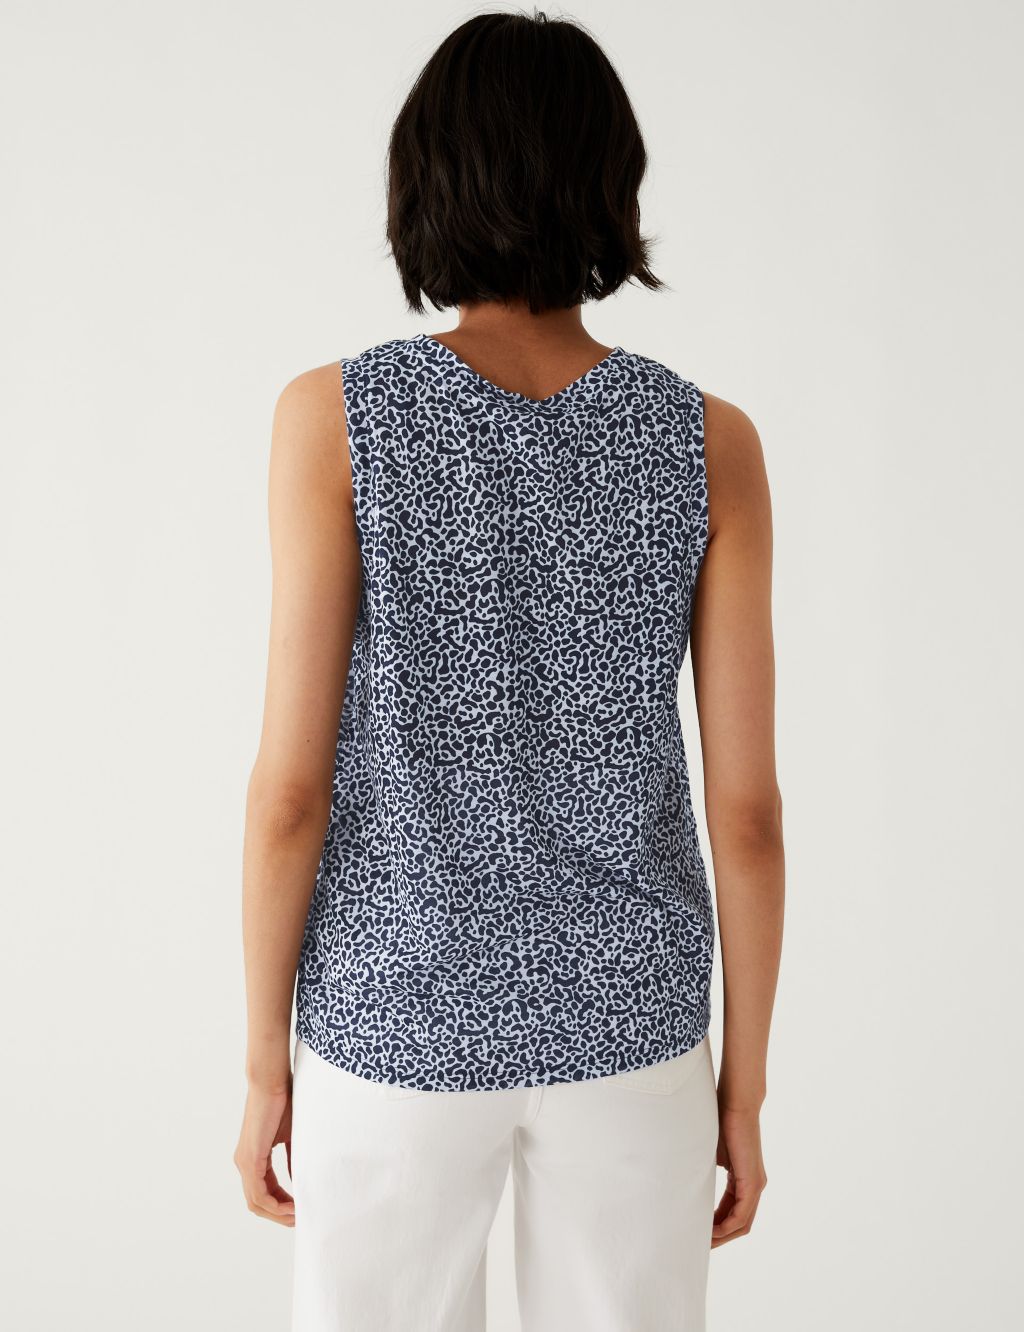 Printed Relaxed Sleeveless Vest Top image 4